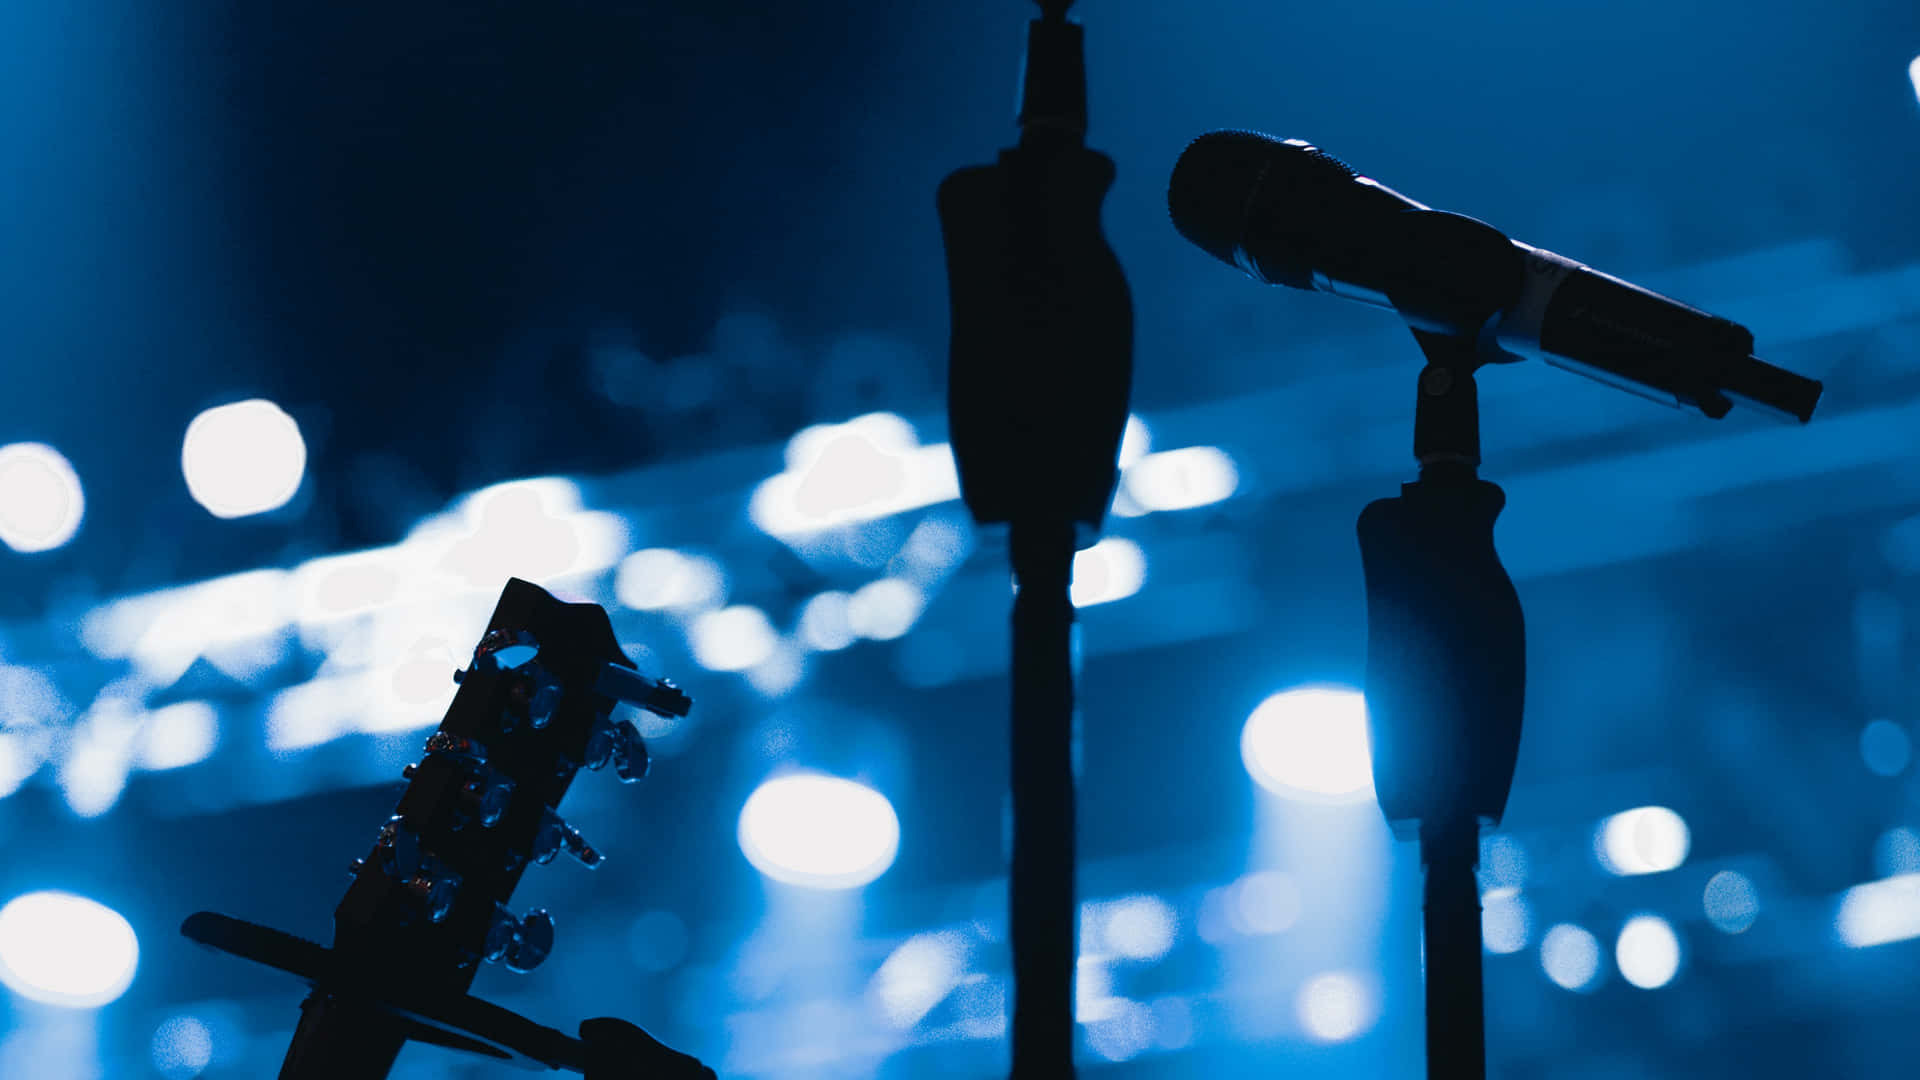 Guitarist's Microphone On The Stage Wallpaper